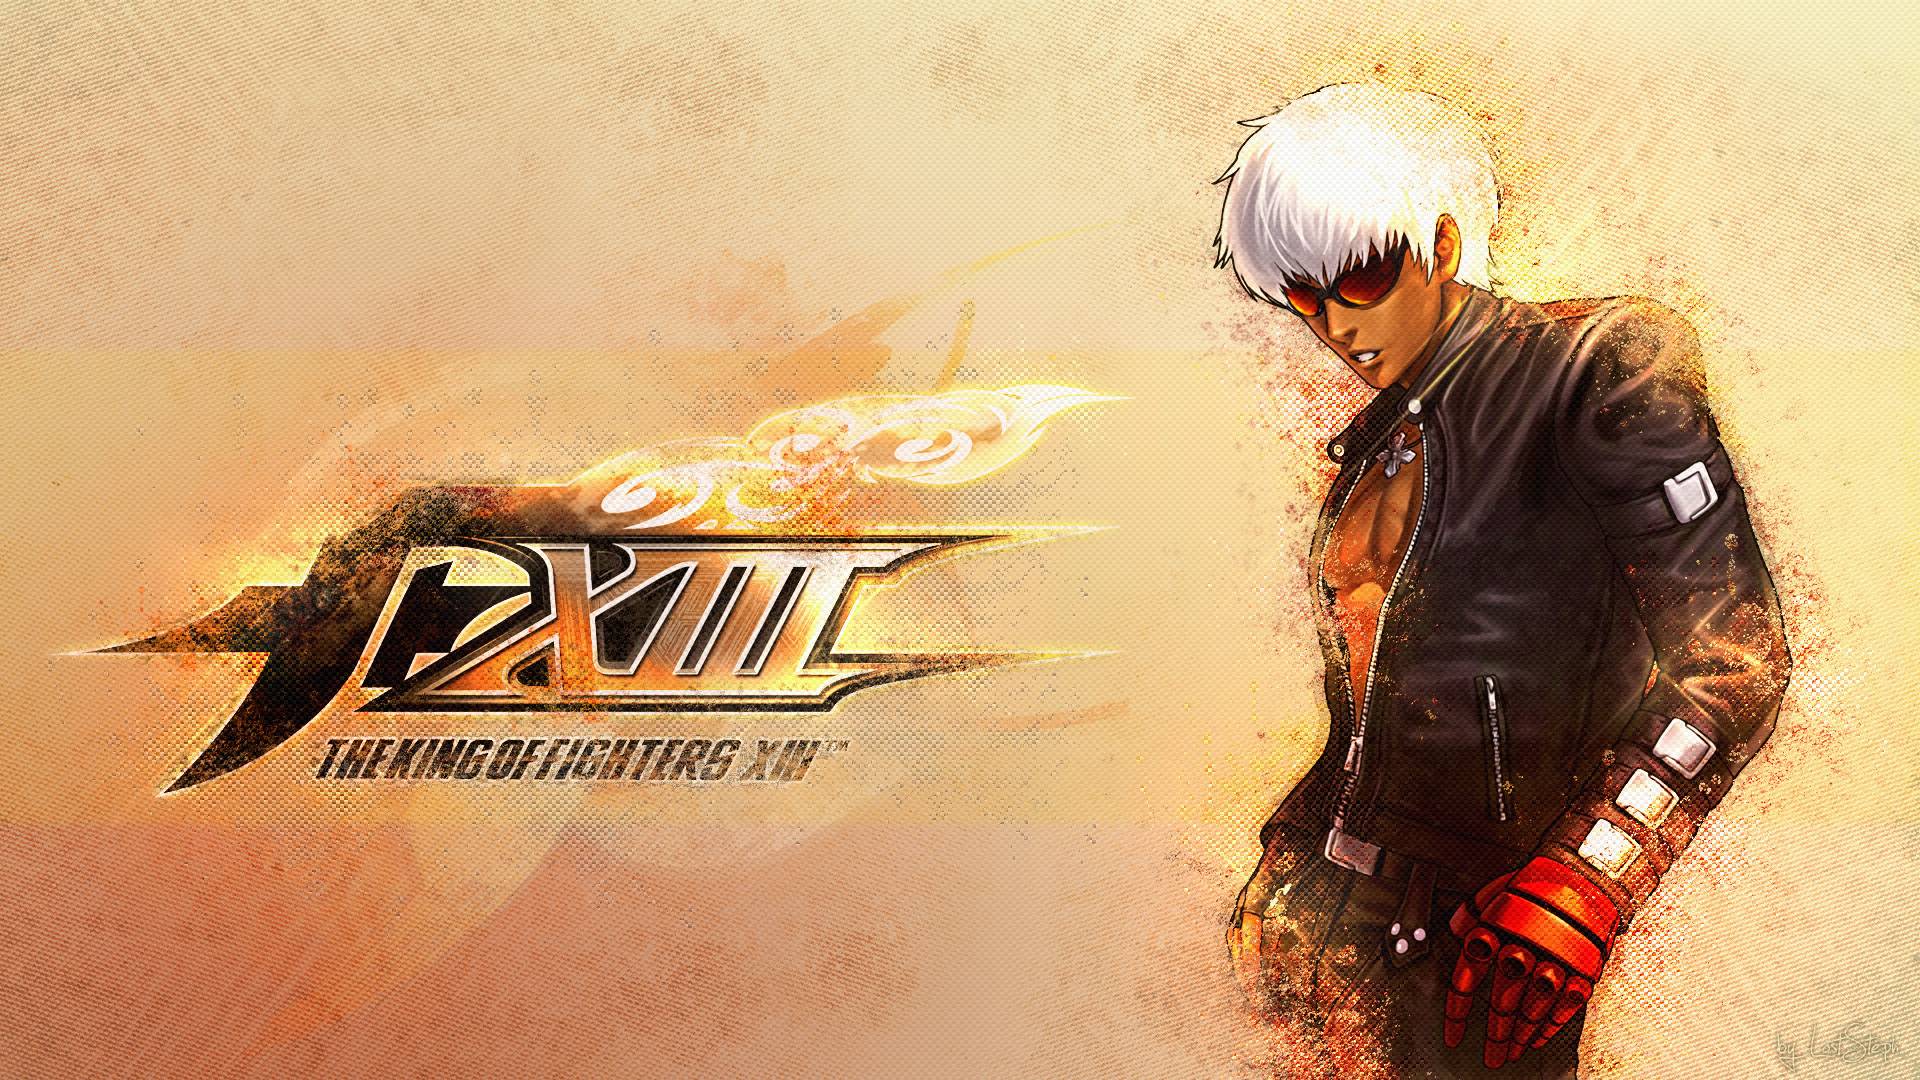 King Of Fighters Wallpapers 1920x1080